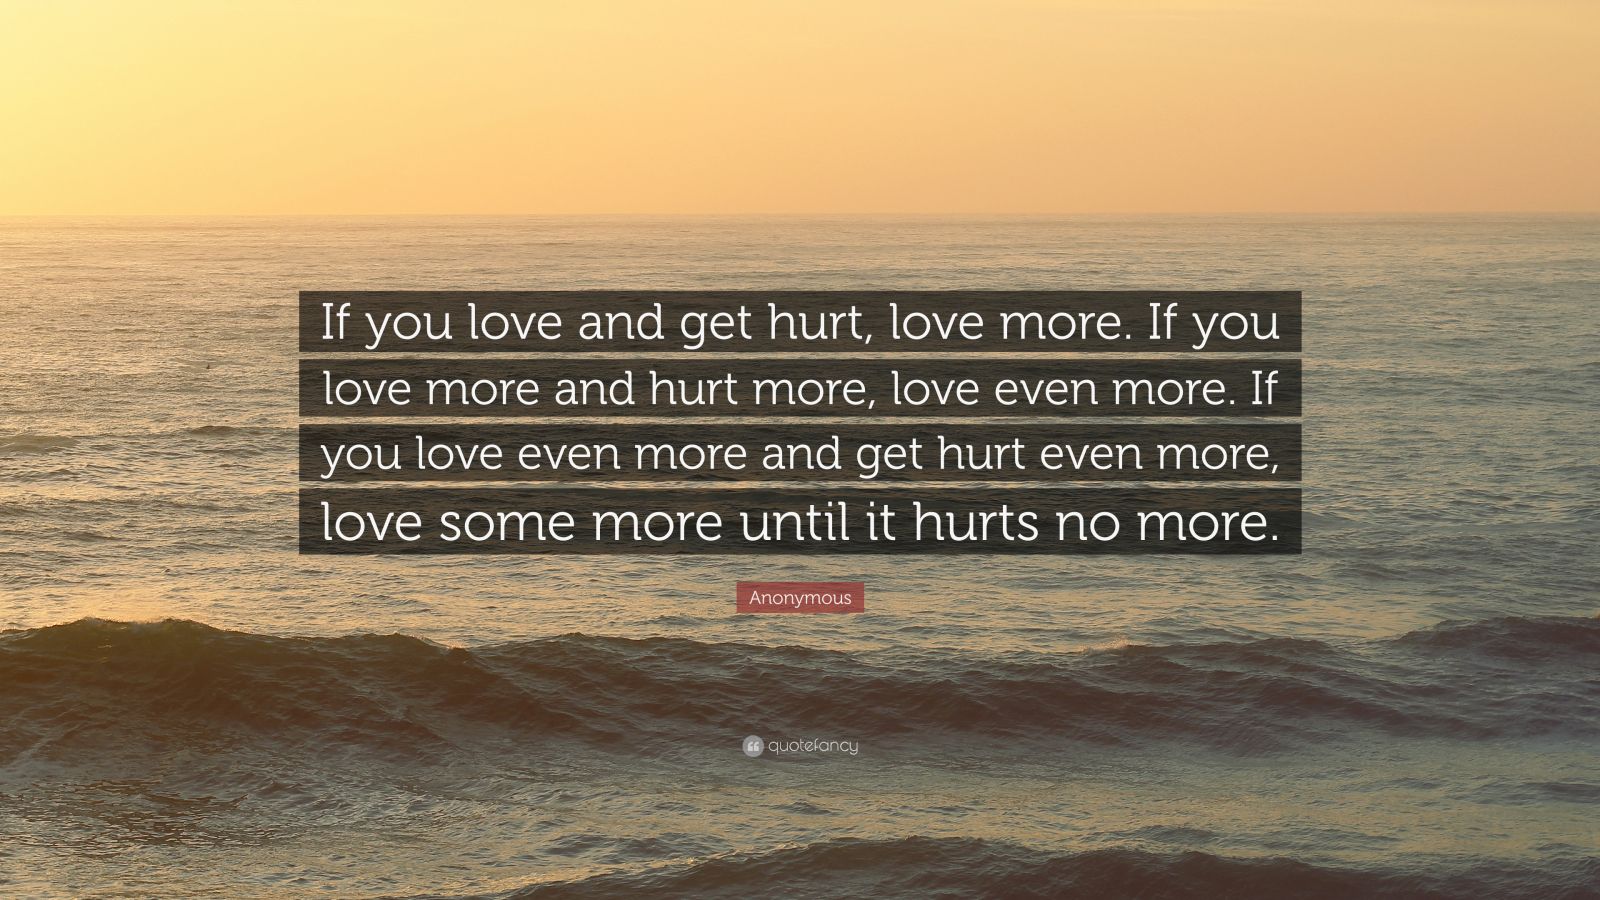 William Shakespeare Quote If You Love And Get Hurt Love More If You Love More And Hurt More Love Even More If You Love Even More And Get Hurt